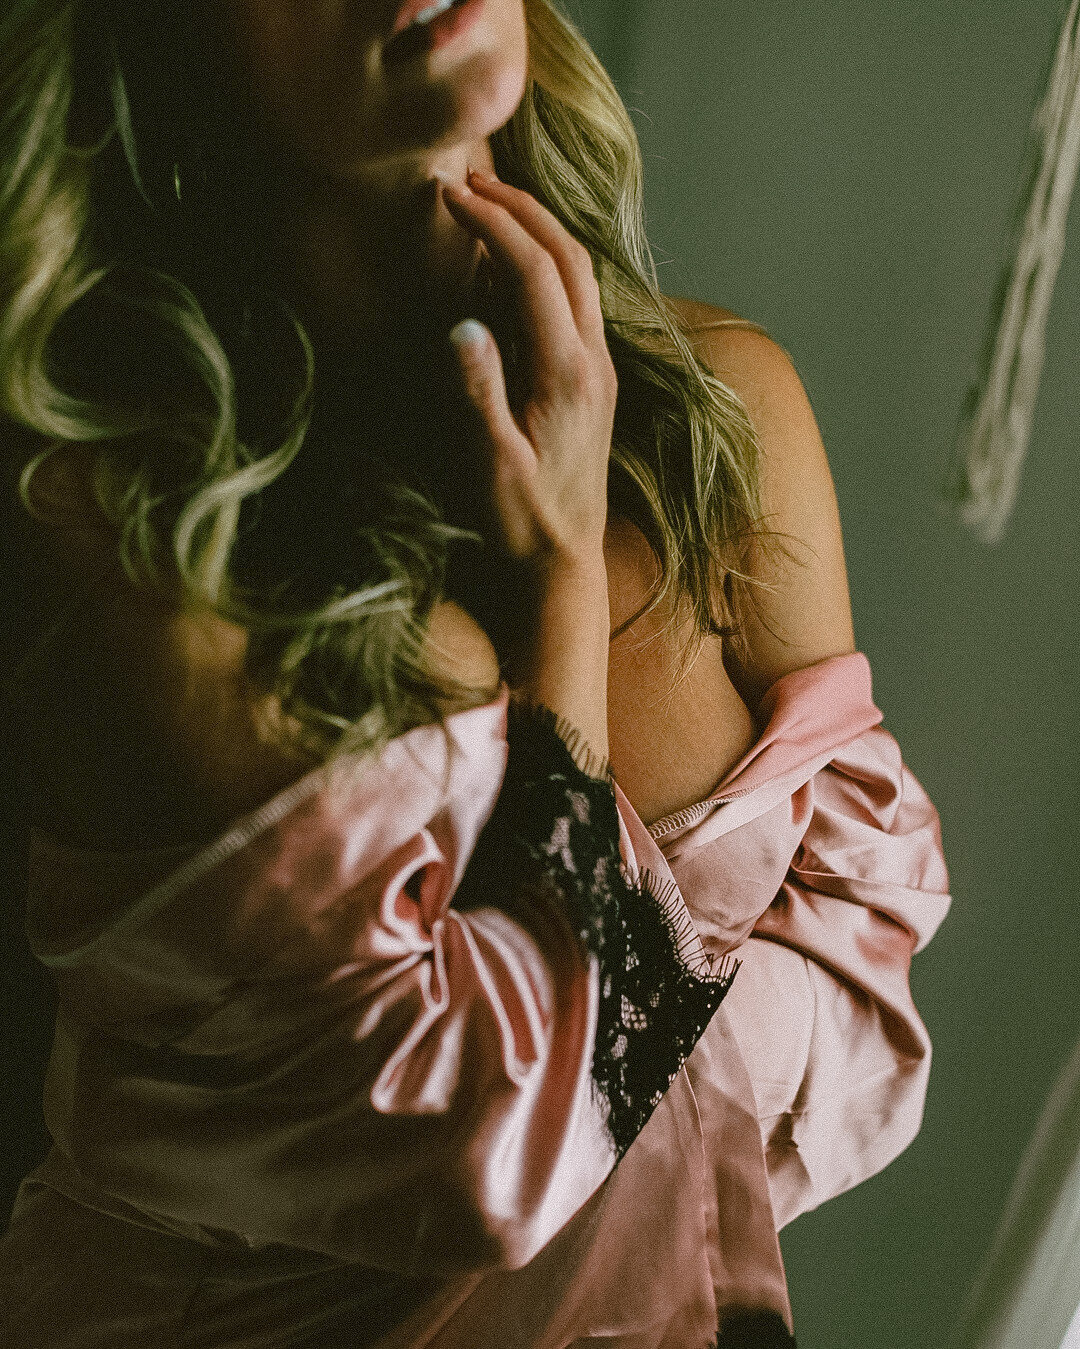 Unlock the sensuality of your relationship with our romantic boudoir photography in Austin. Let us create images that ignite the flames of your love